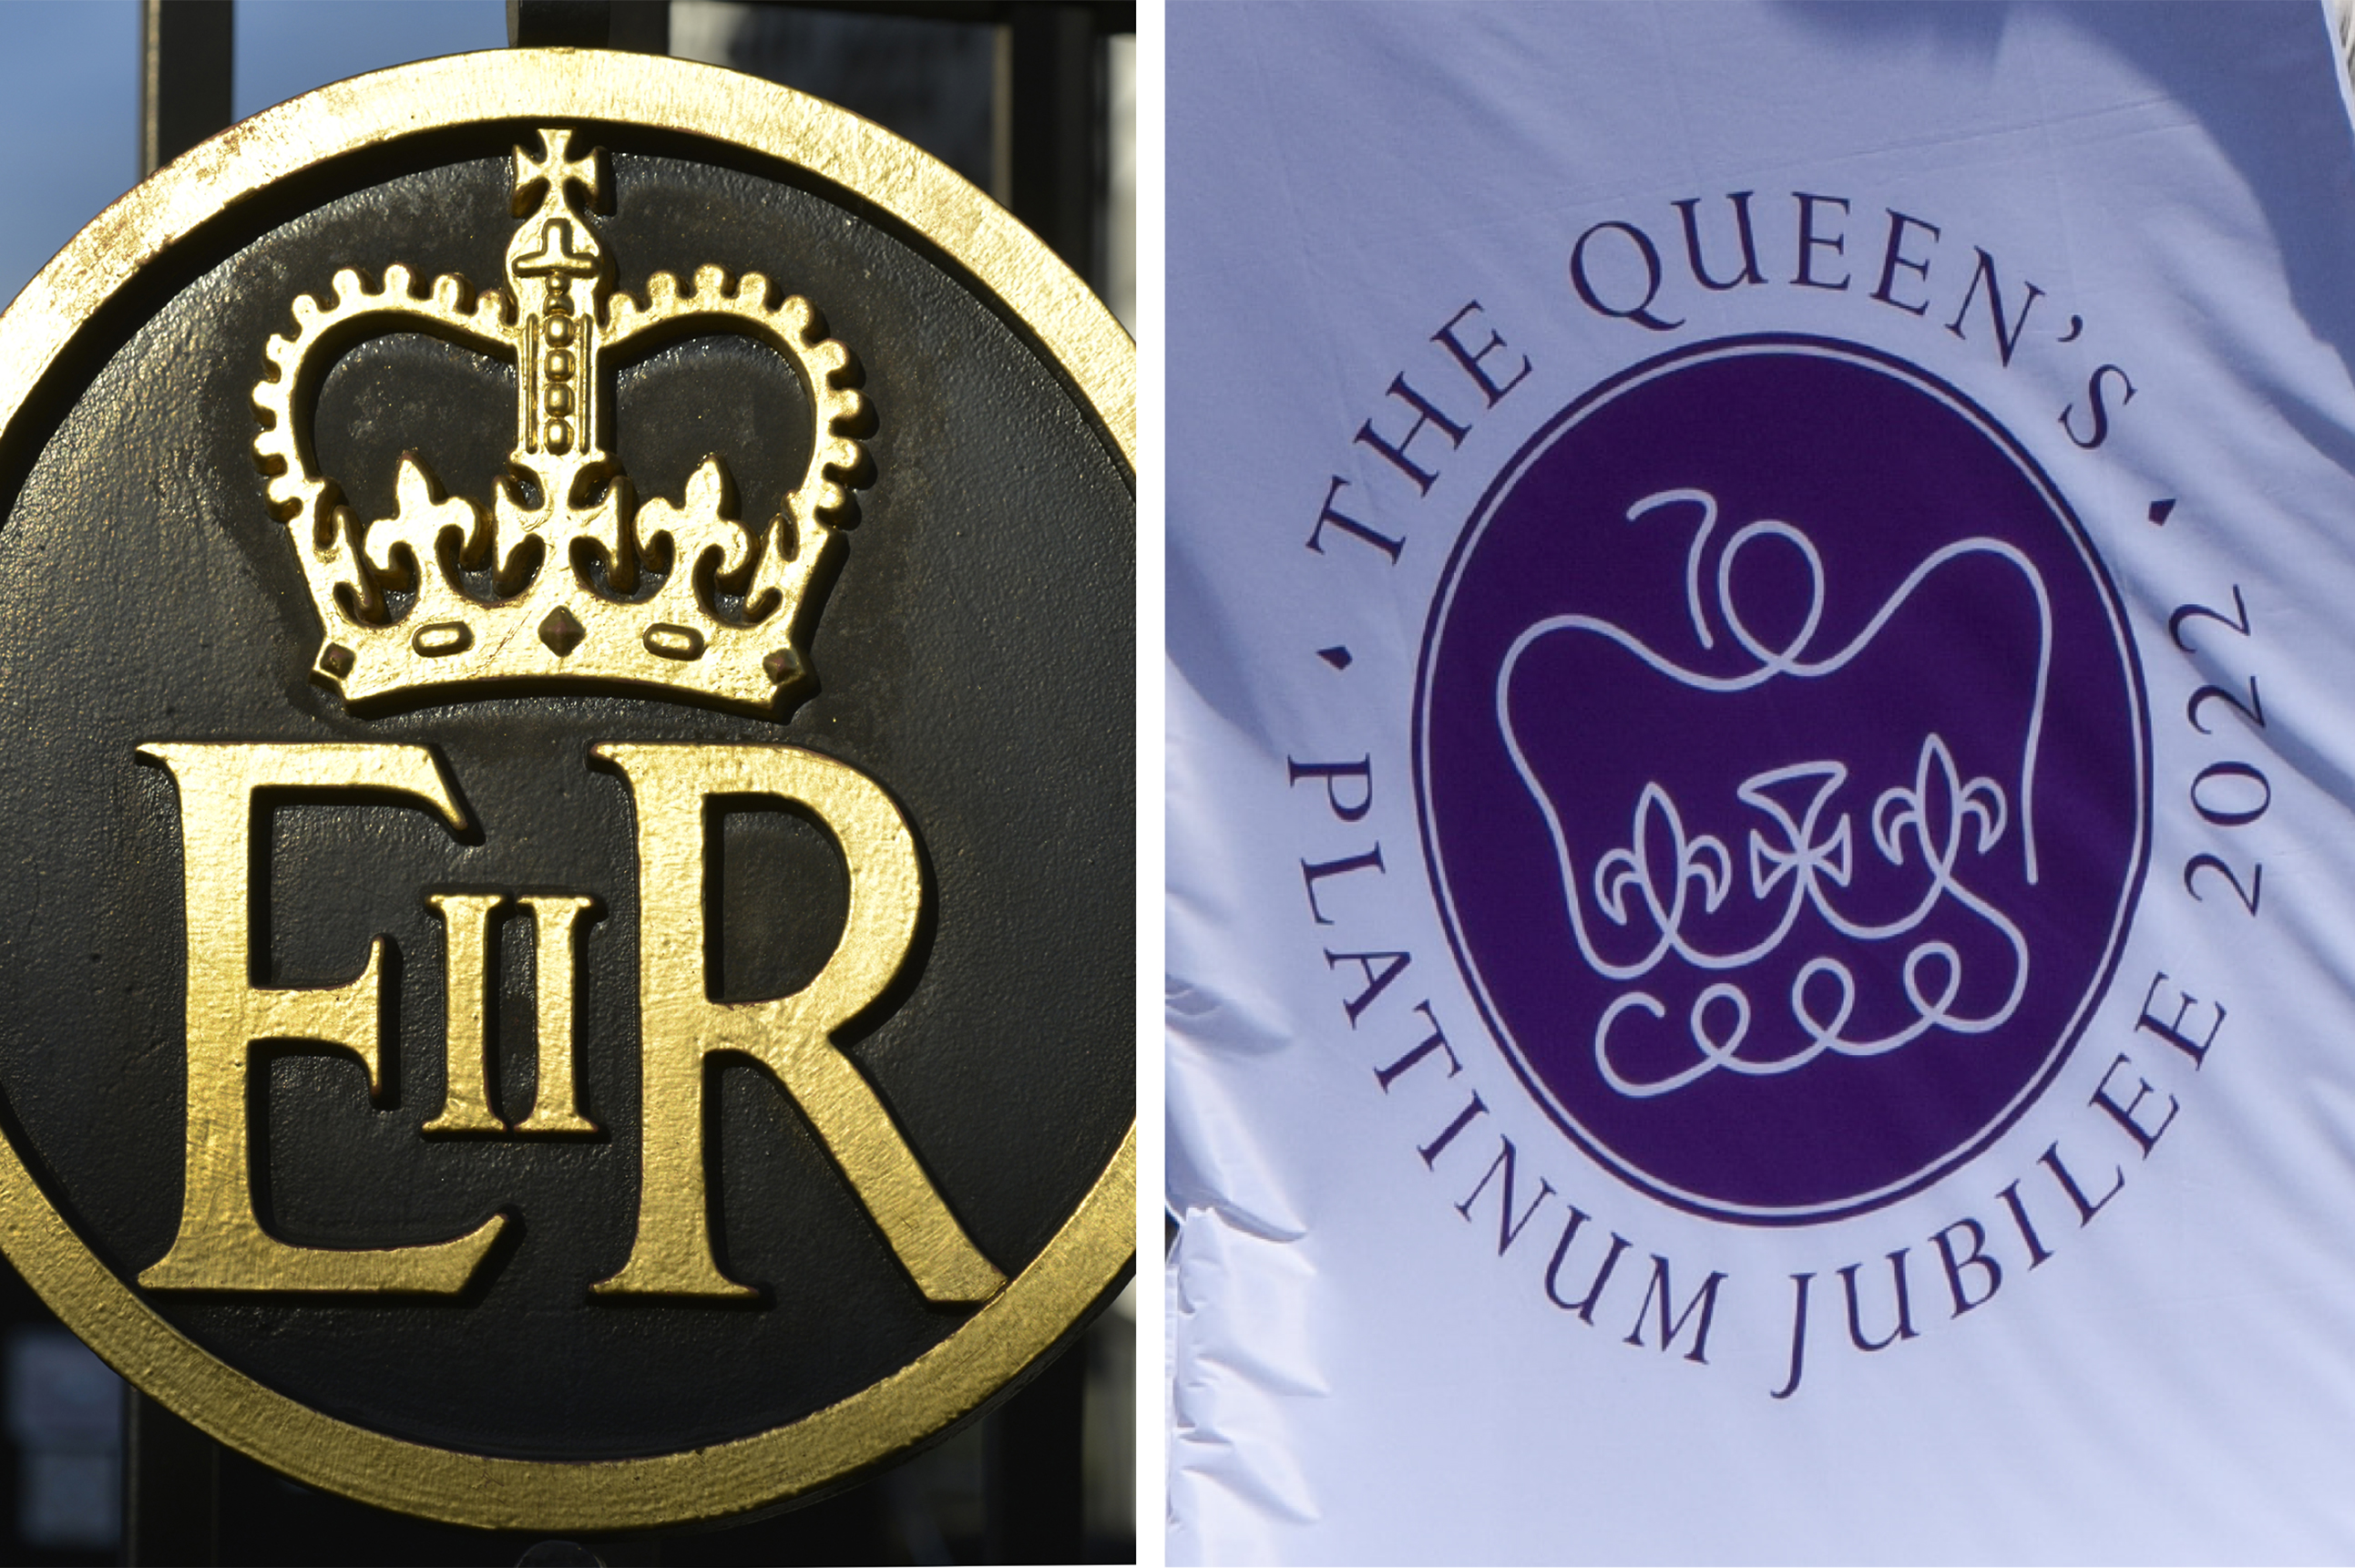 Side-by-side comparison of two crown images. A close up photo of the Royal Crest on the Tower of London gates. The old style Royal Crest features a gold circle filled with a black centre, on which a gold crown and the letters E R II are embossed. The comparison image focusses on the centre of a Platinum Jubilee banner. A modern, single line platinum crown is drawn against a royal purple background.